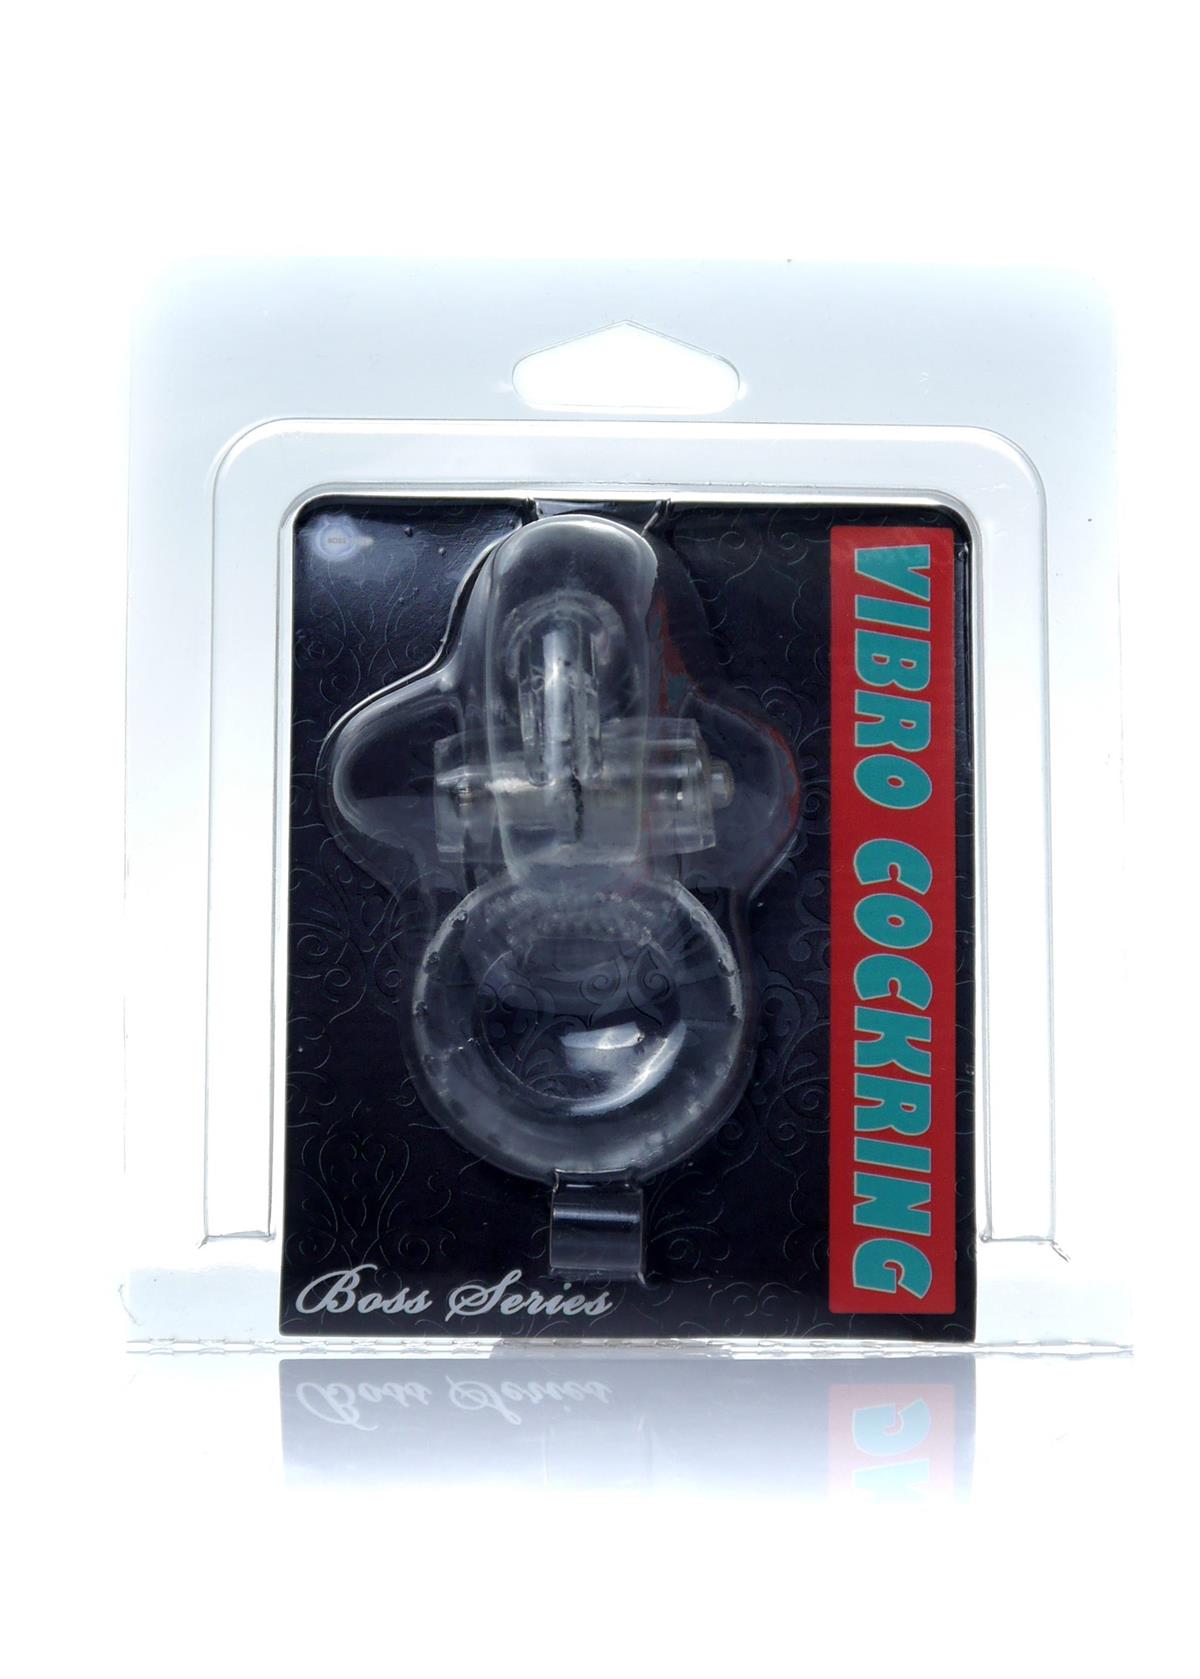 Bossoftoys - 67-00049 - Rabbit Vibrating Cockring  - 7,5 cm - Clear - batteries included - packed in strong blister